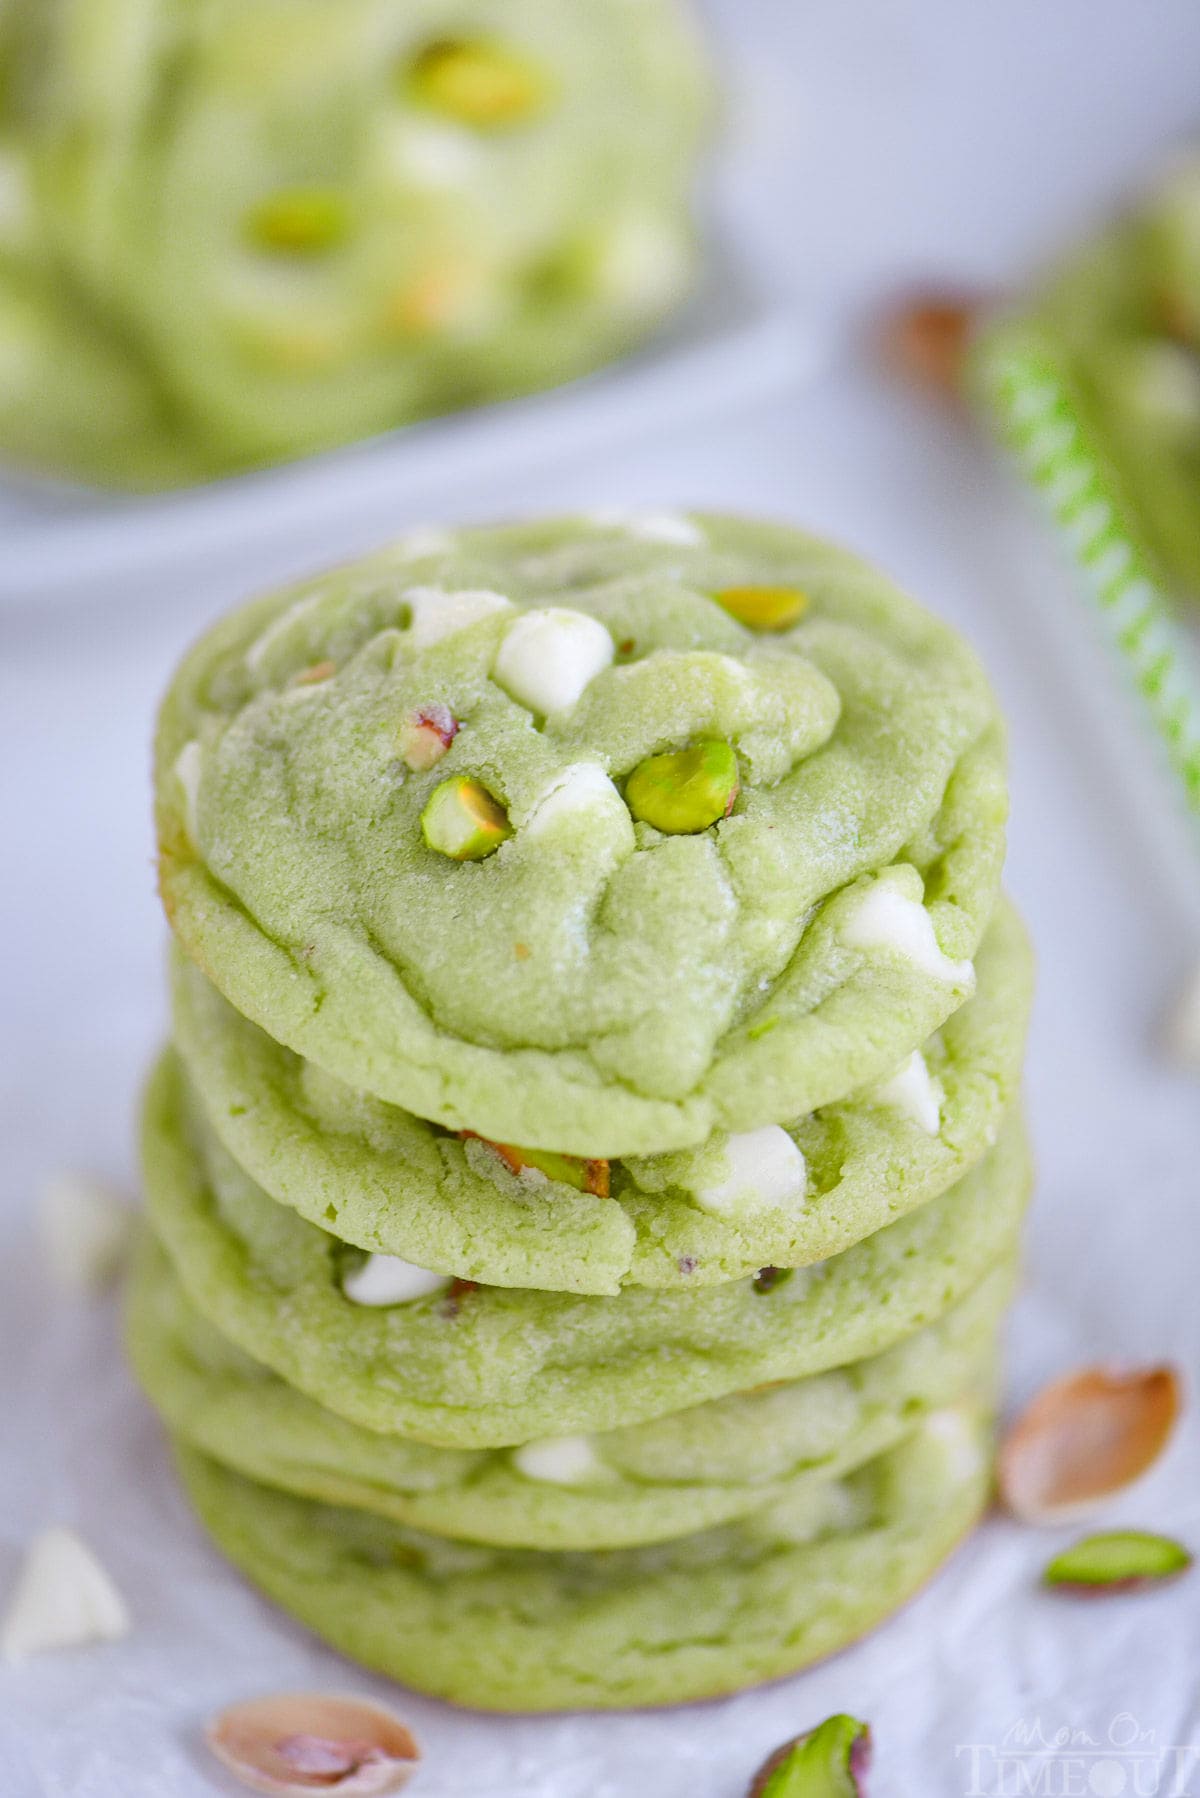 stack of five pistachio cookies on white parchment paper. the cookies have white chocolate chips and pistachios in them.